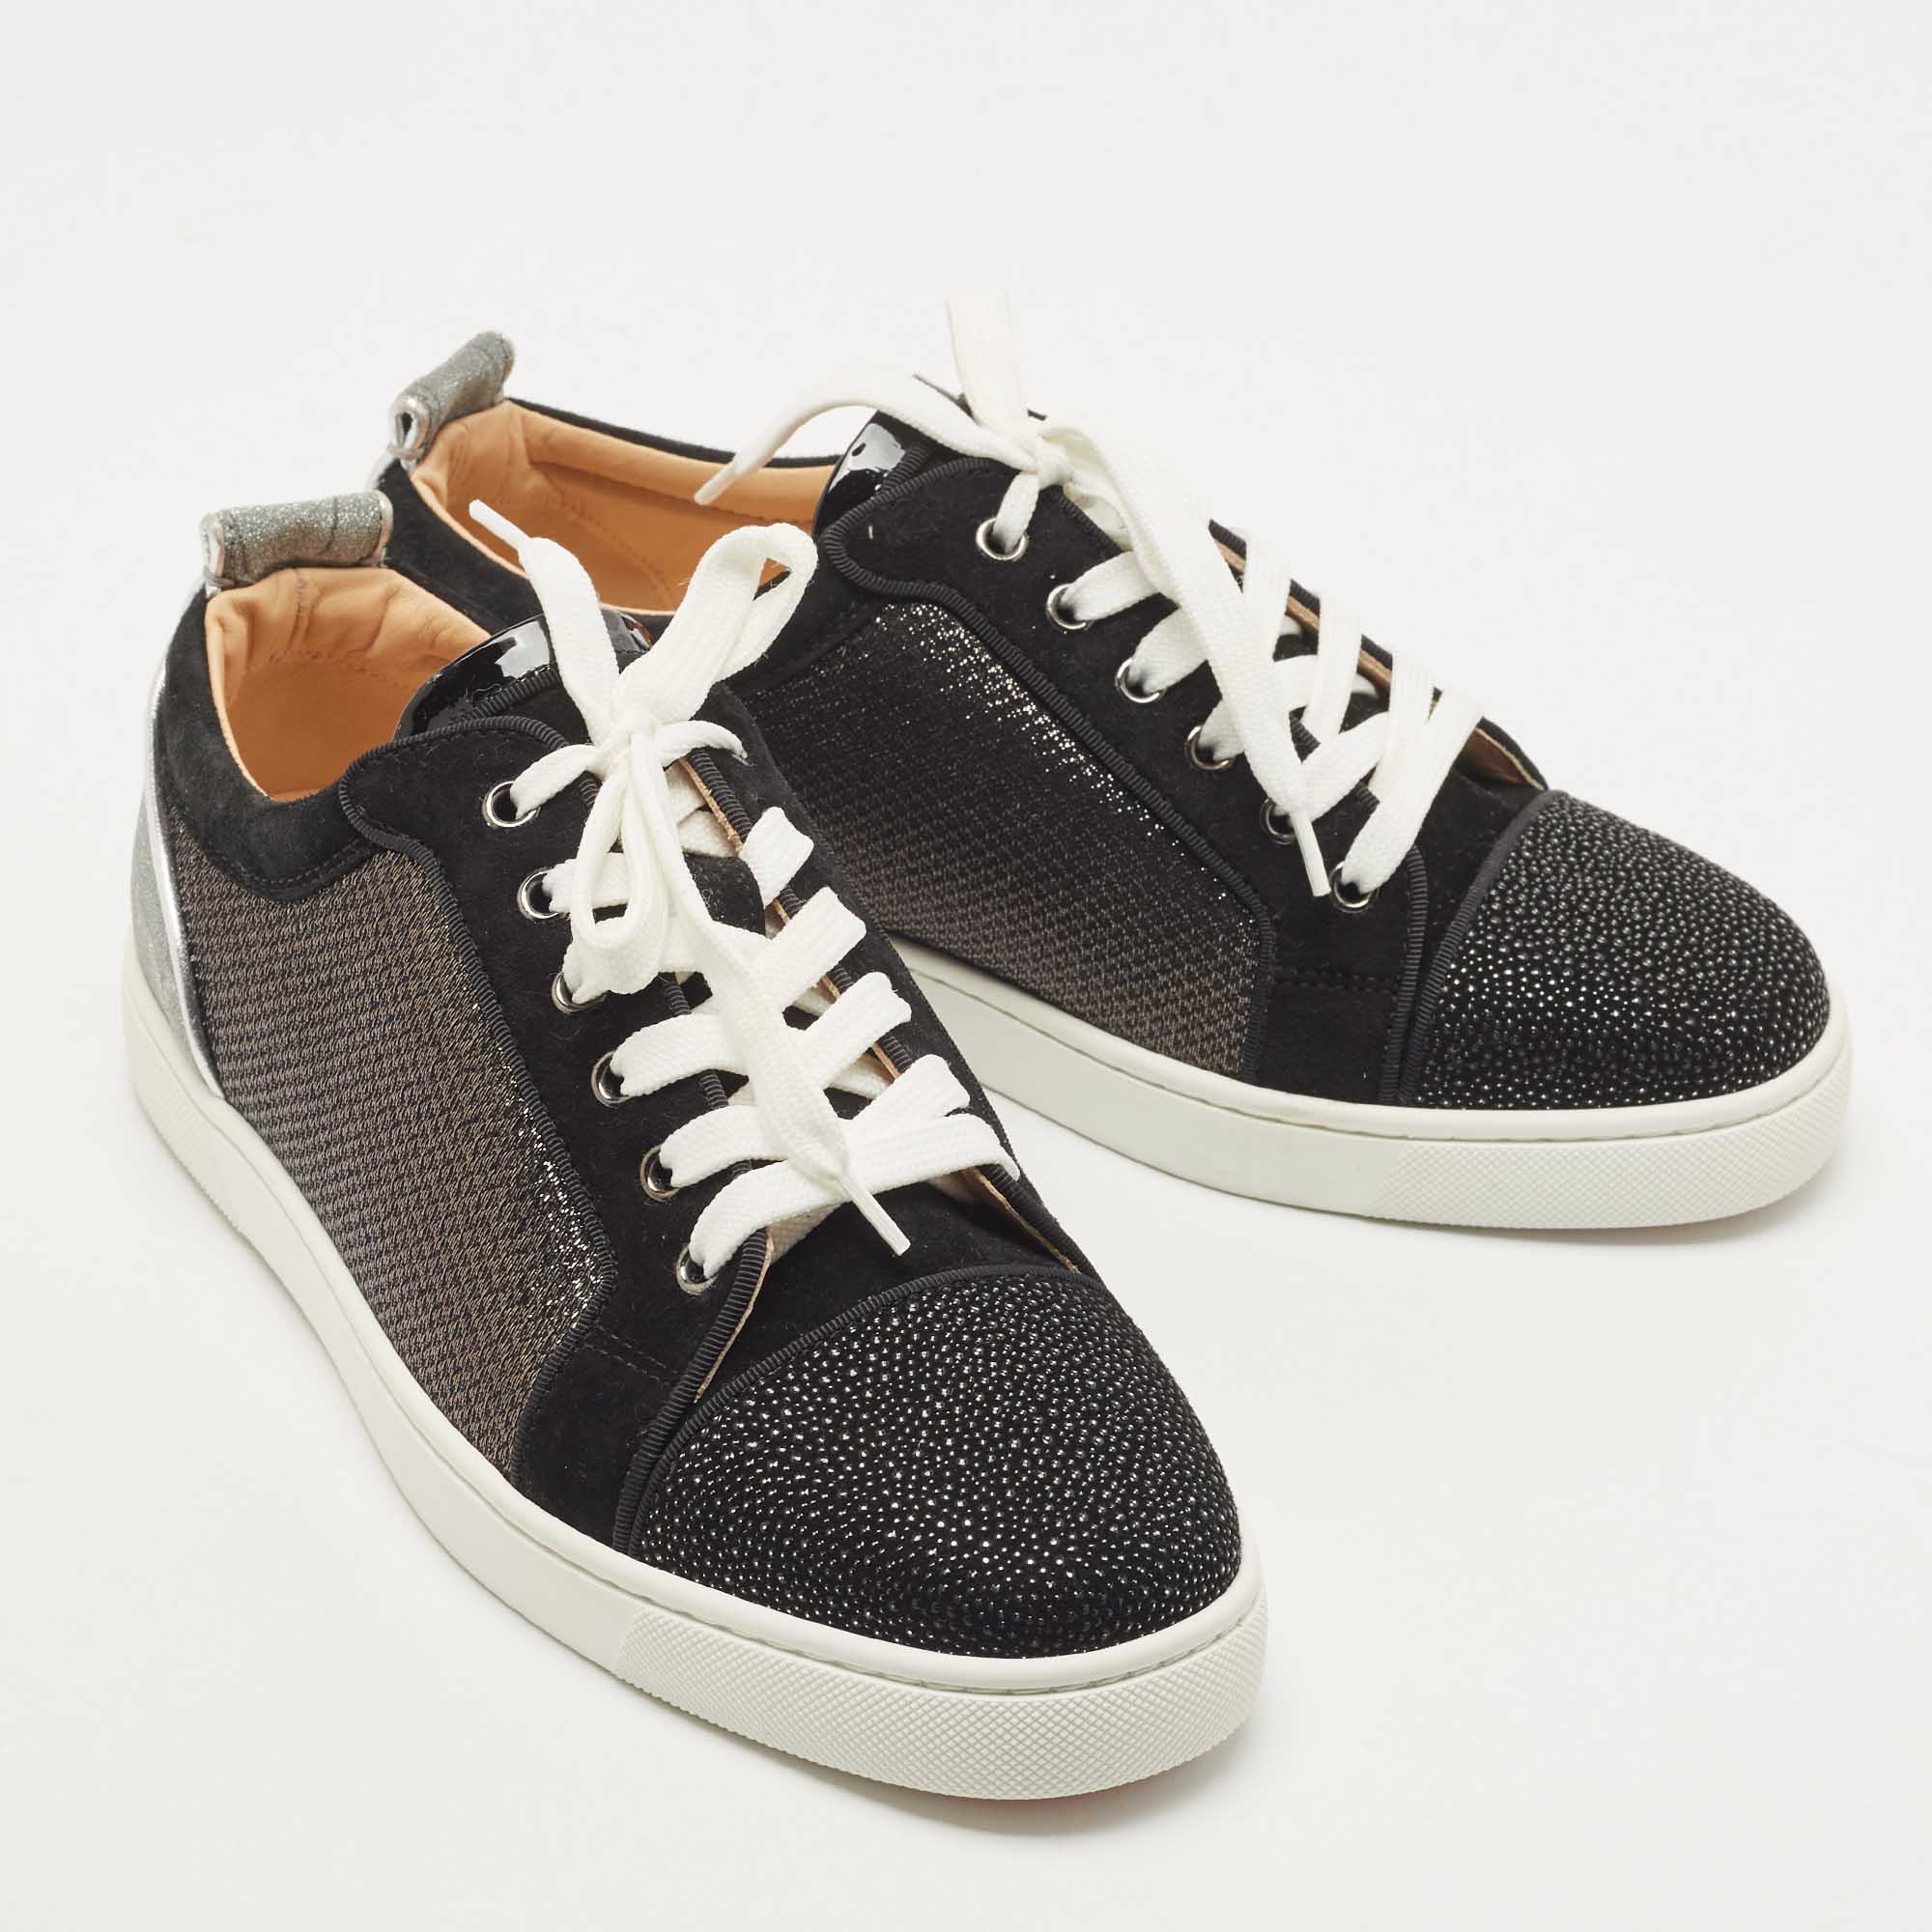 Christian Louboutin Louis strass sneaker, suede black grey crystal, size  36-46